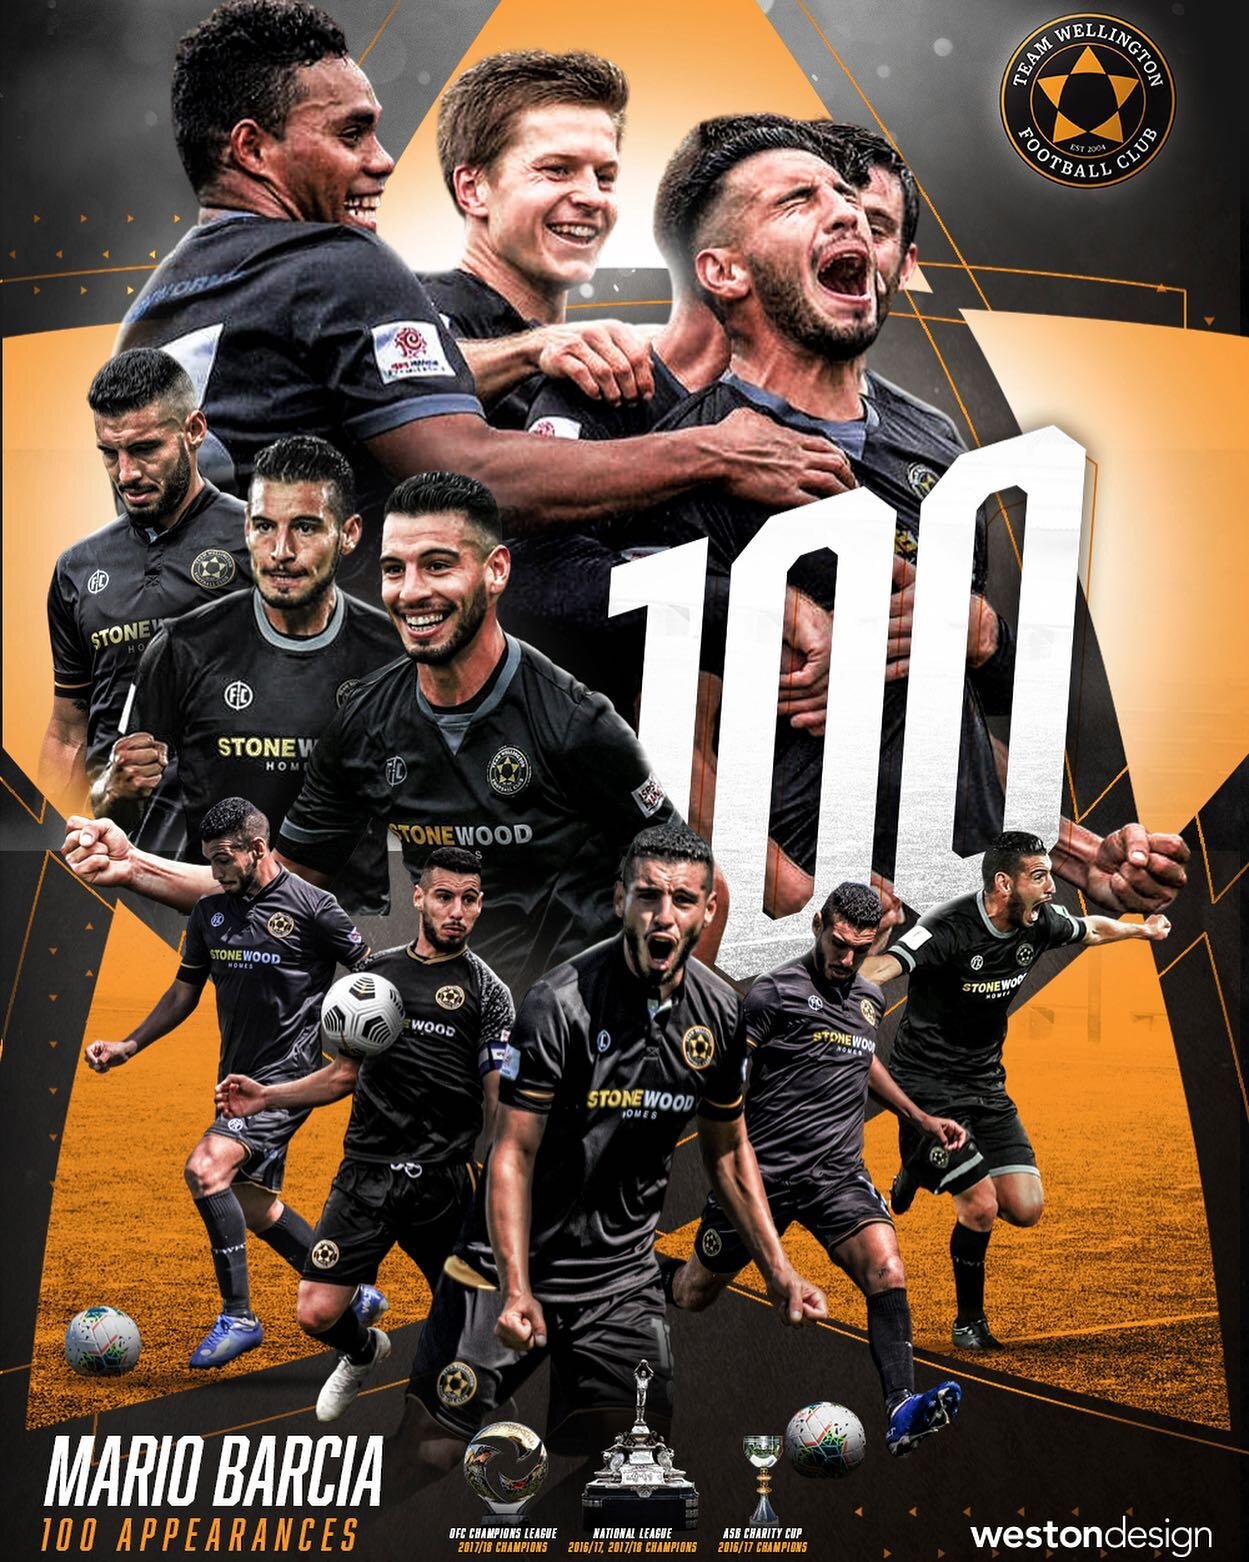 Huge congratulations to @team.welly midfielder @barciamario on reaching 100 appearances for the club! 👊🏼🔶✨

It was a pleasure creating this poster commission to be presented to Mario, a hard-working, aggressive midfielder who only ever seems to sc